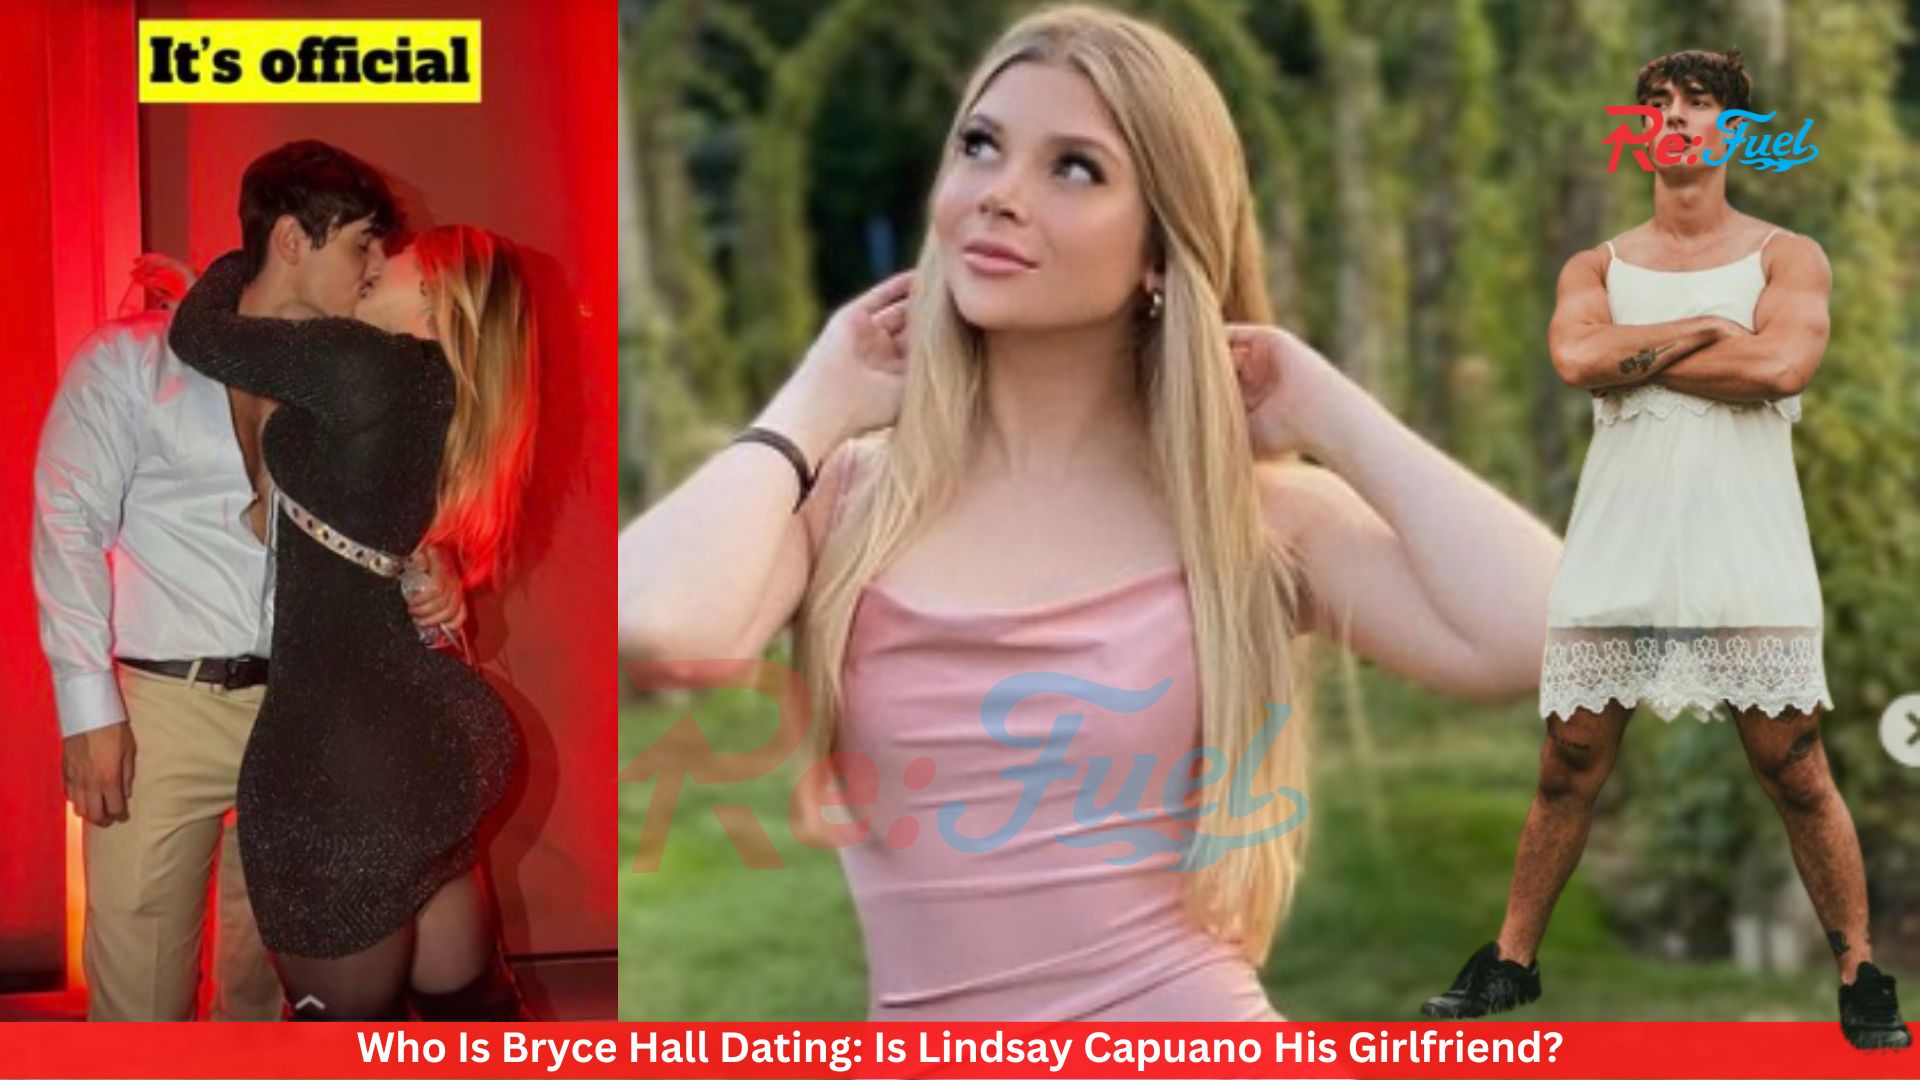 Who Is Bryce Hall Dating: Is Lindsay Capuano His Girlfriend?